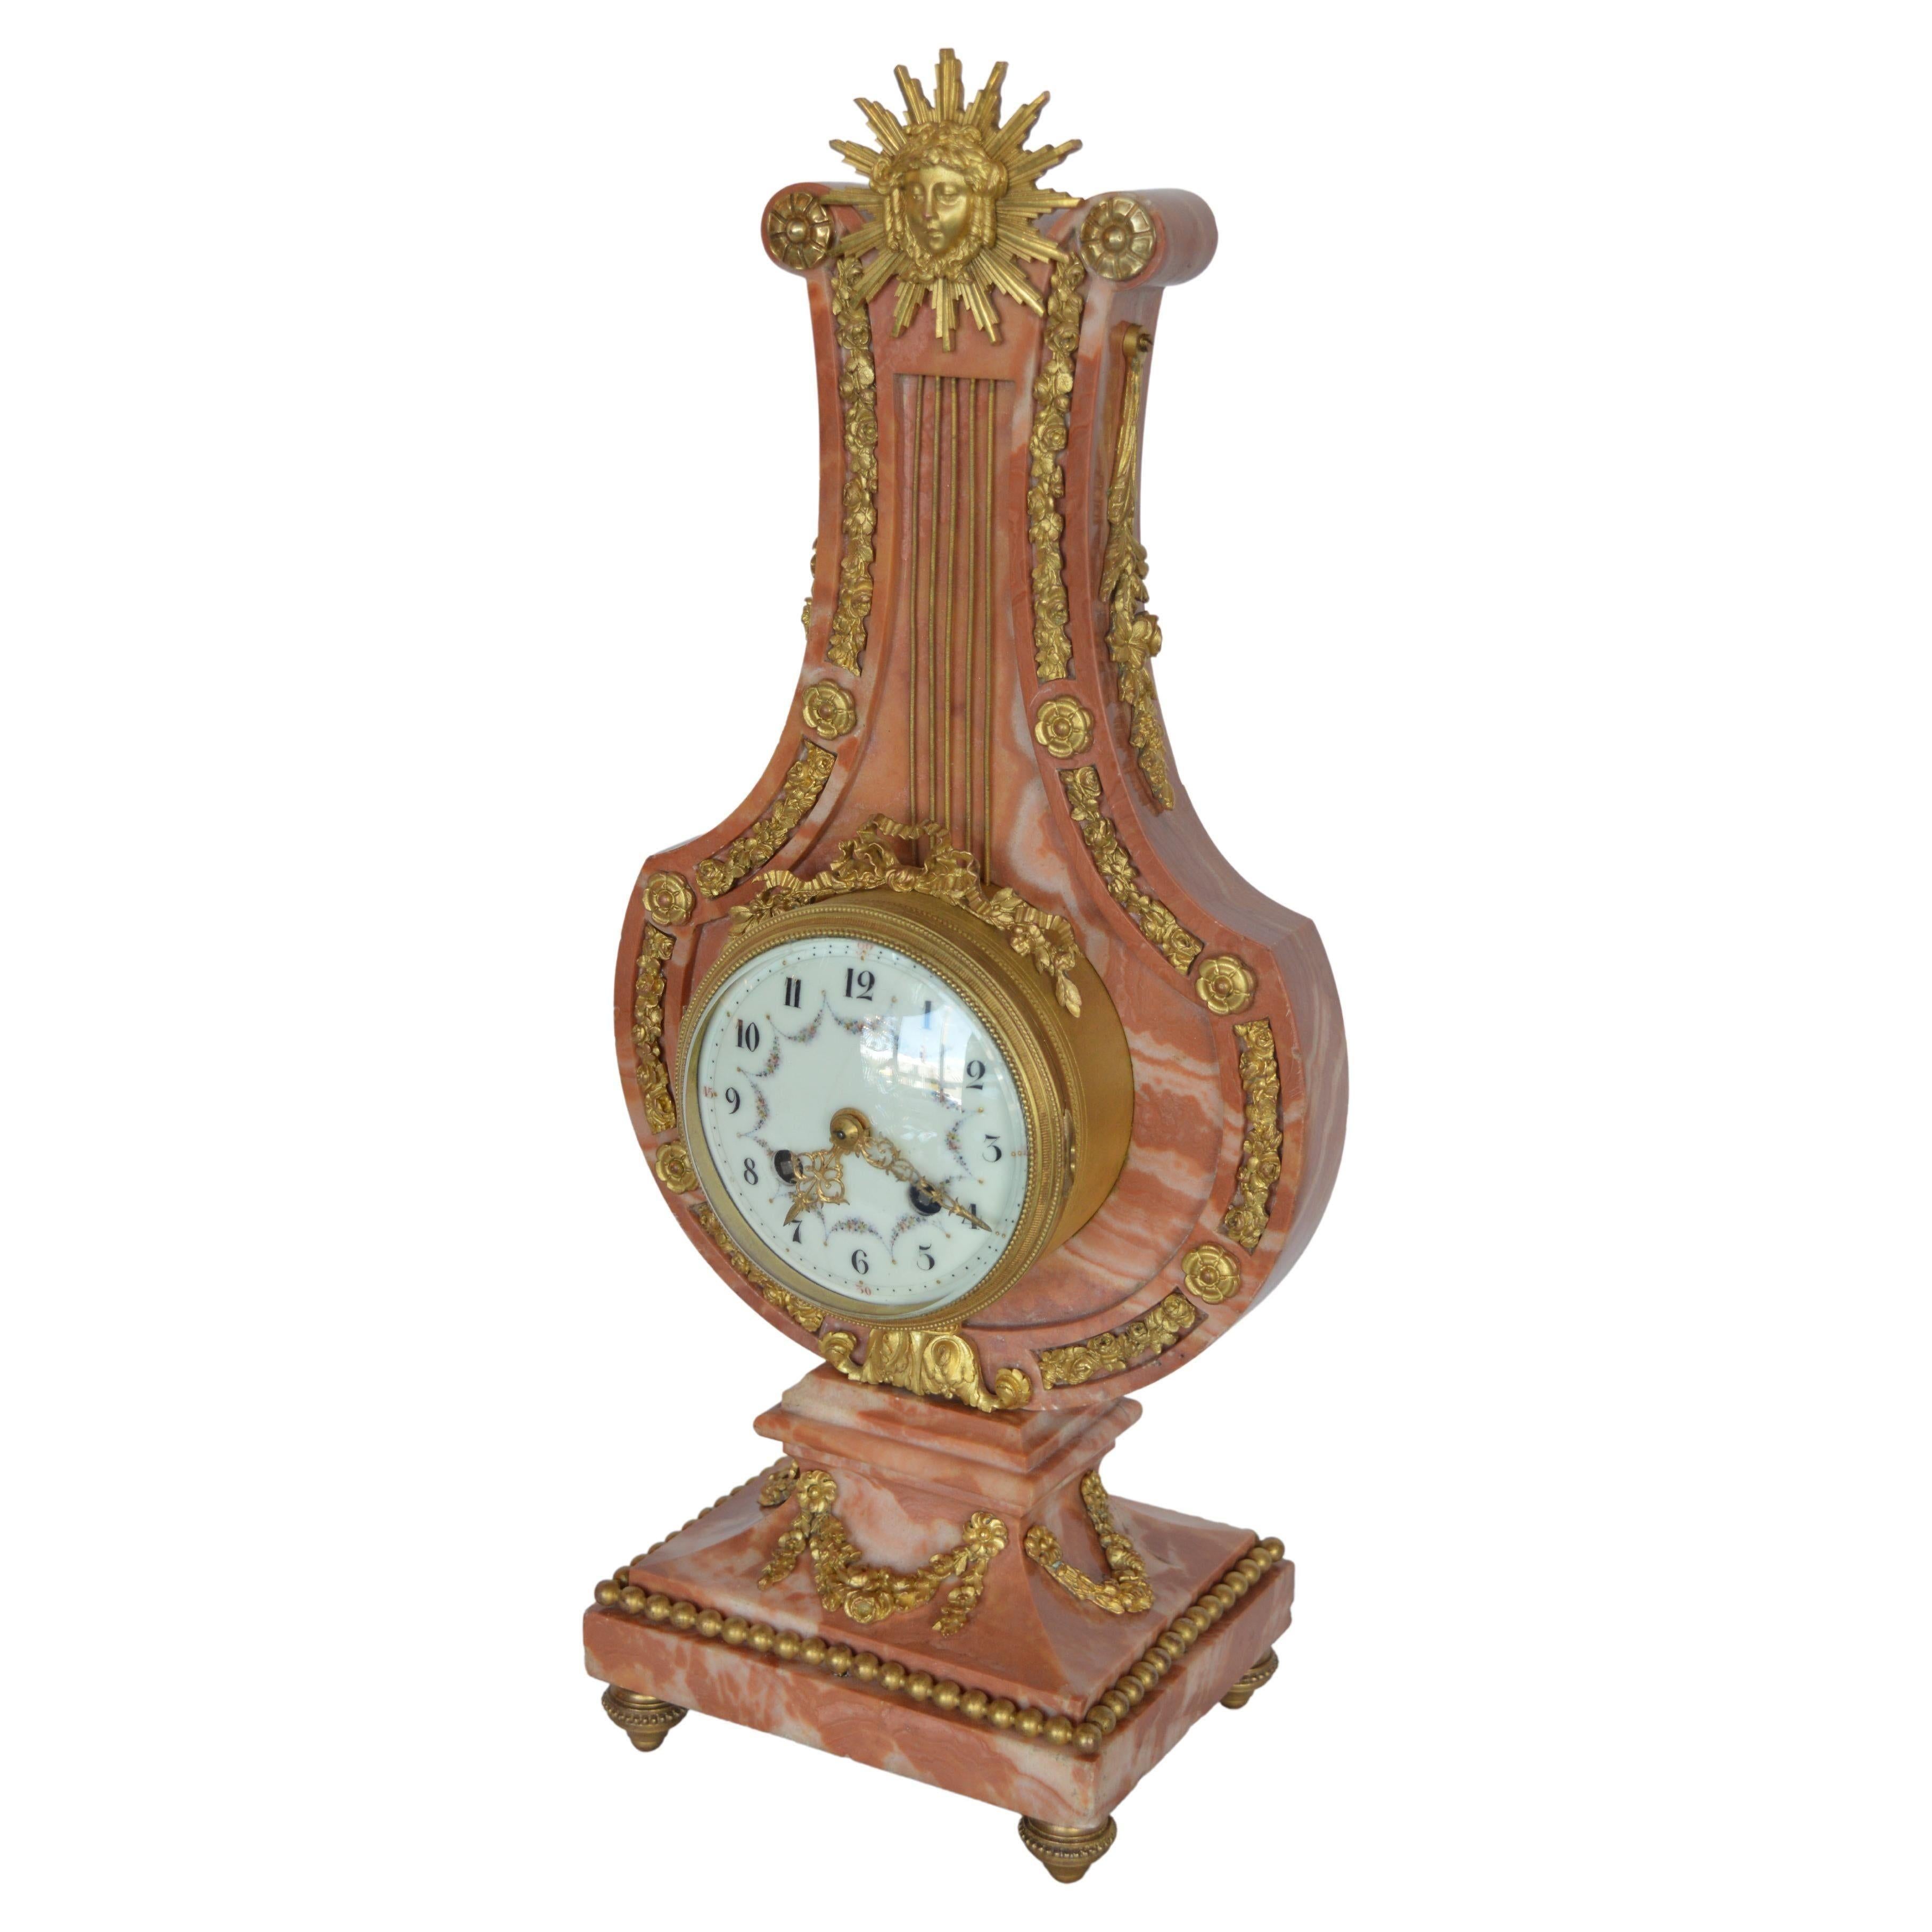 French 19th century Louis XVI style mantel clock signed by J Marti. Made from marble and gilt bronze with porcelain dial.